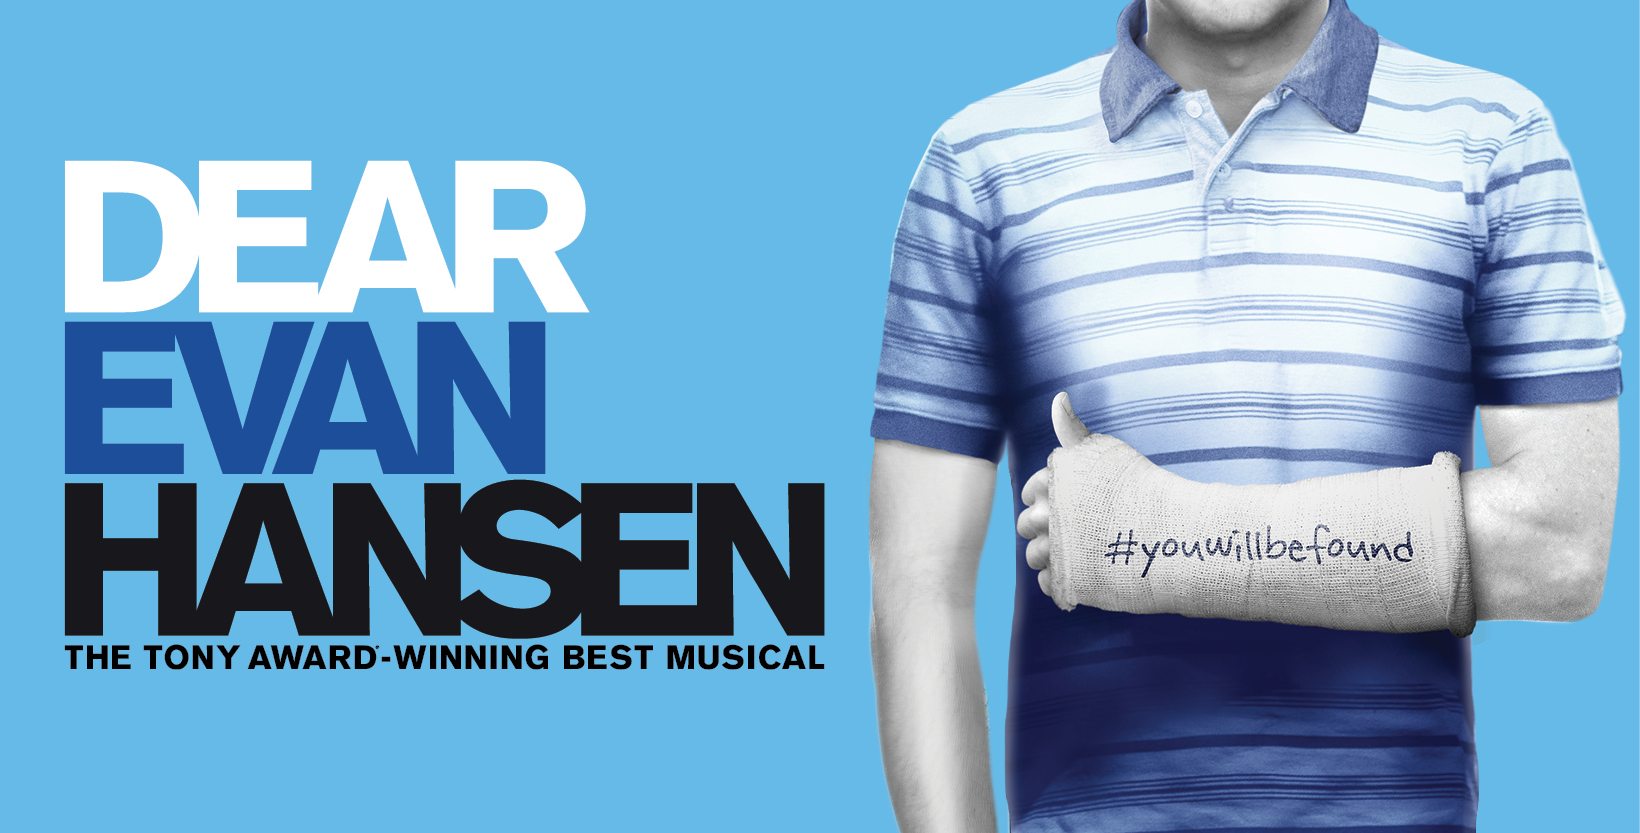 DEAR EVAN HANSEN, CHARLIE AND THE CHOCOLATE FACTORY, and MISS SAIGON Press Days, “The Nun” in Theaters, and more!